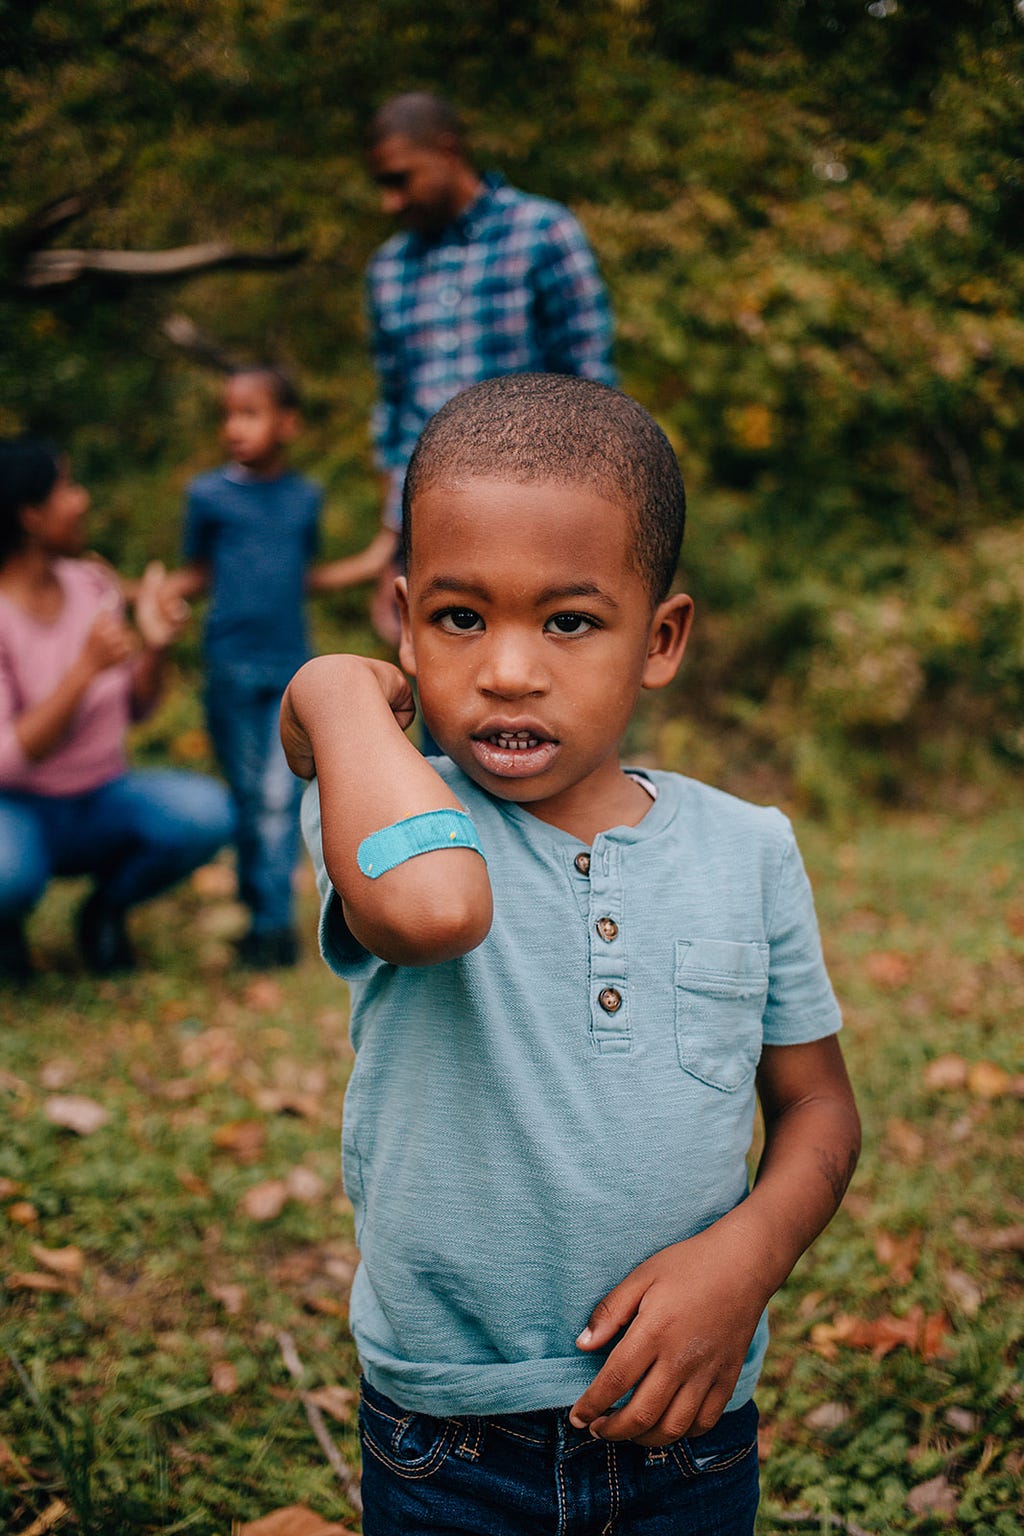 A boy with a band aid on his arm.